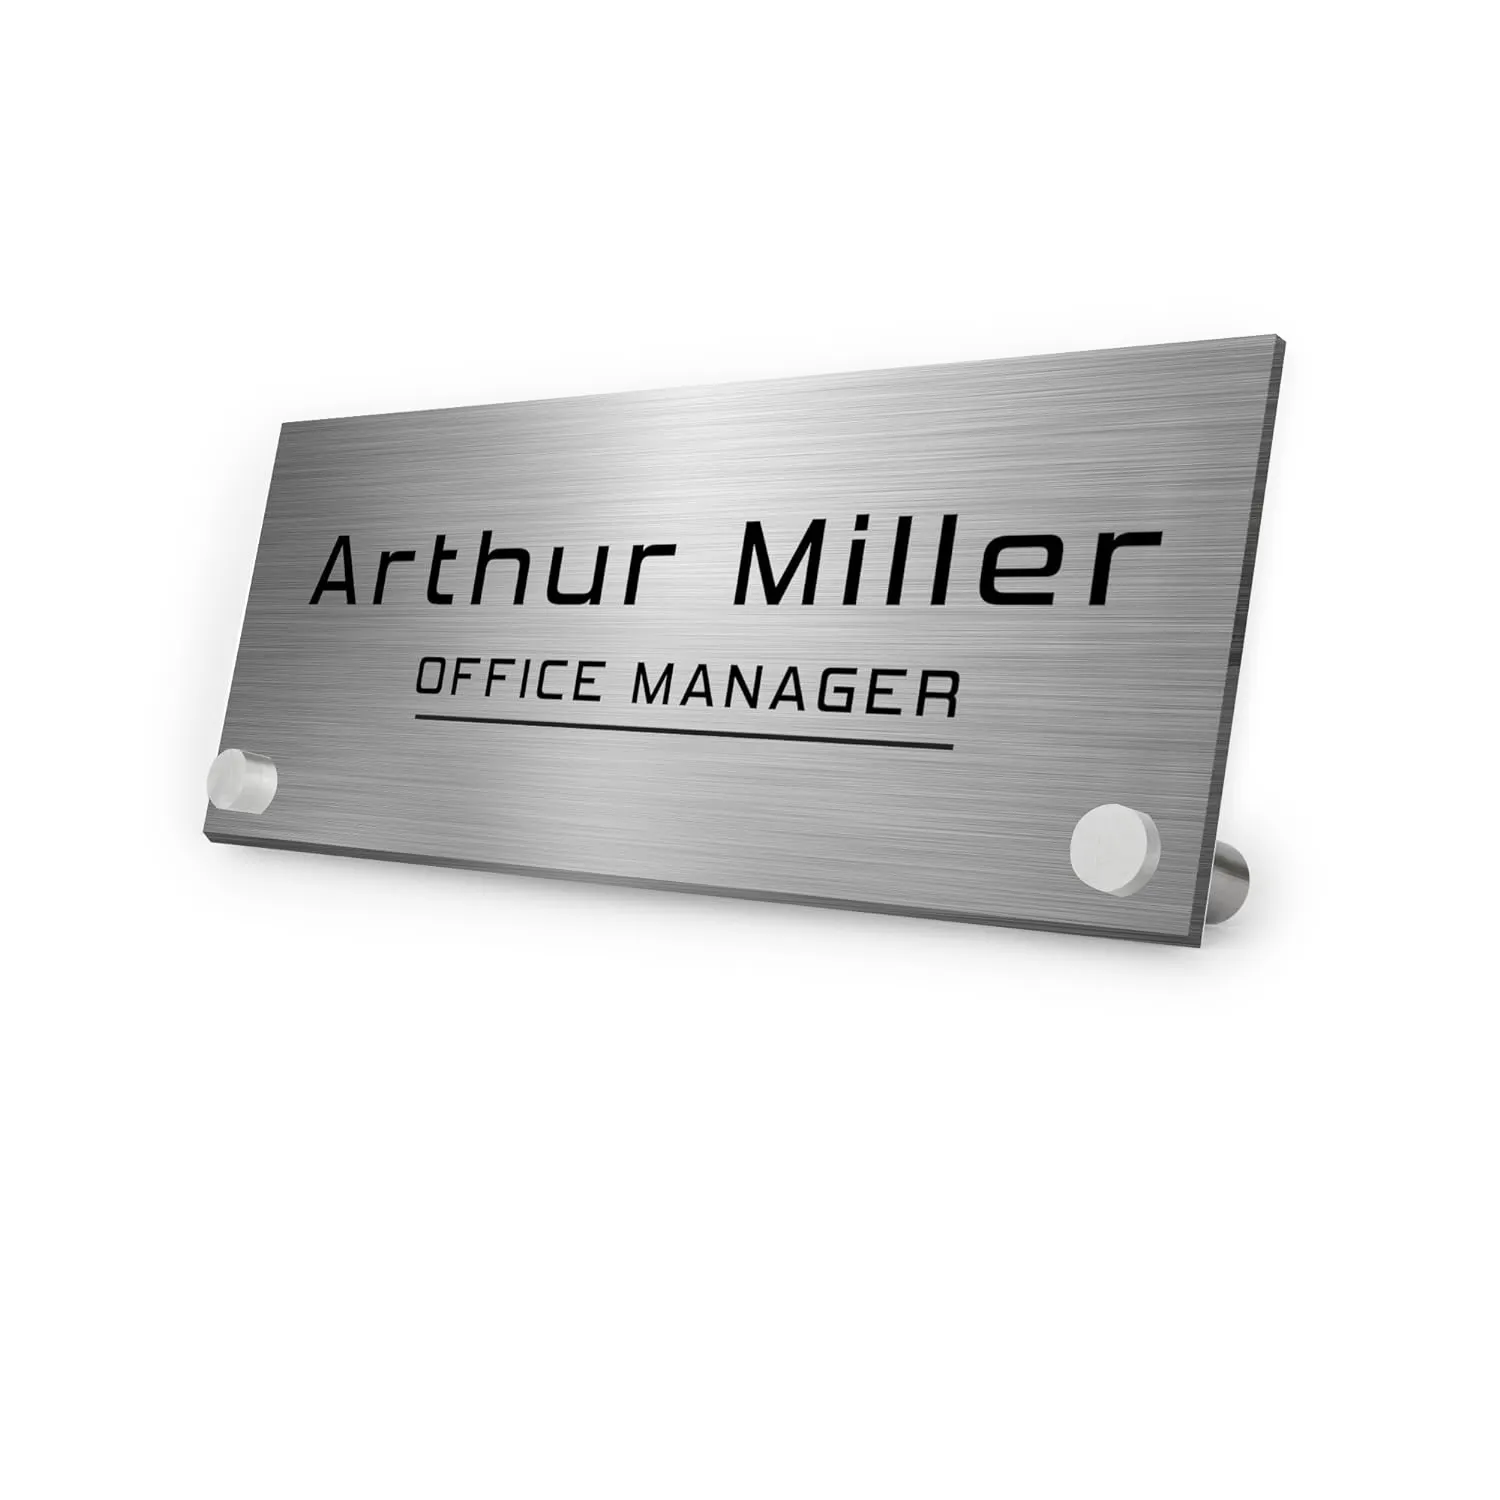 Custom Name Plate For Desk Personalize Your Desk Plate With Your Name & Your Position